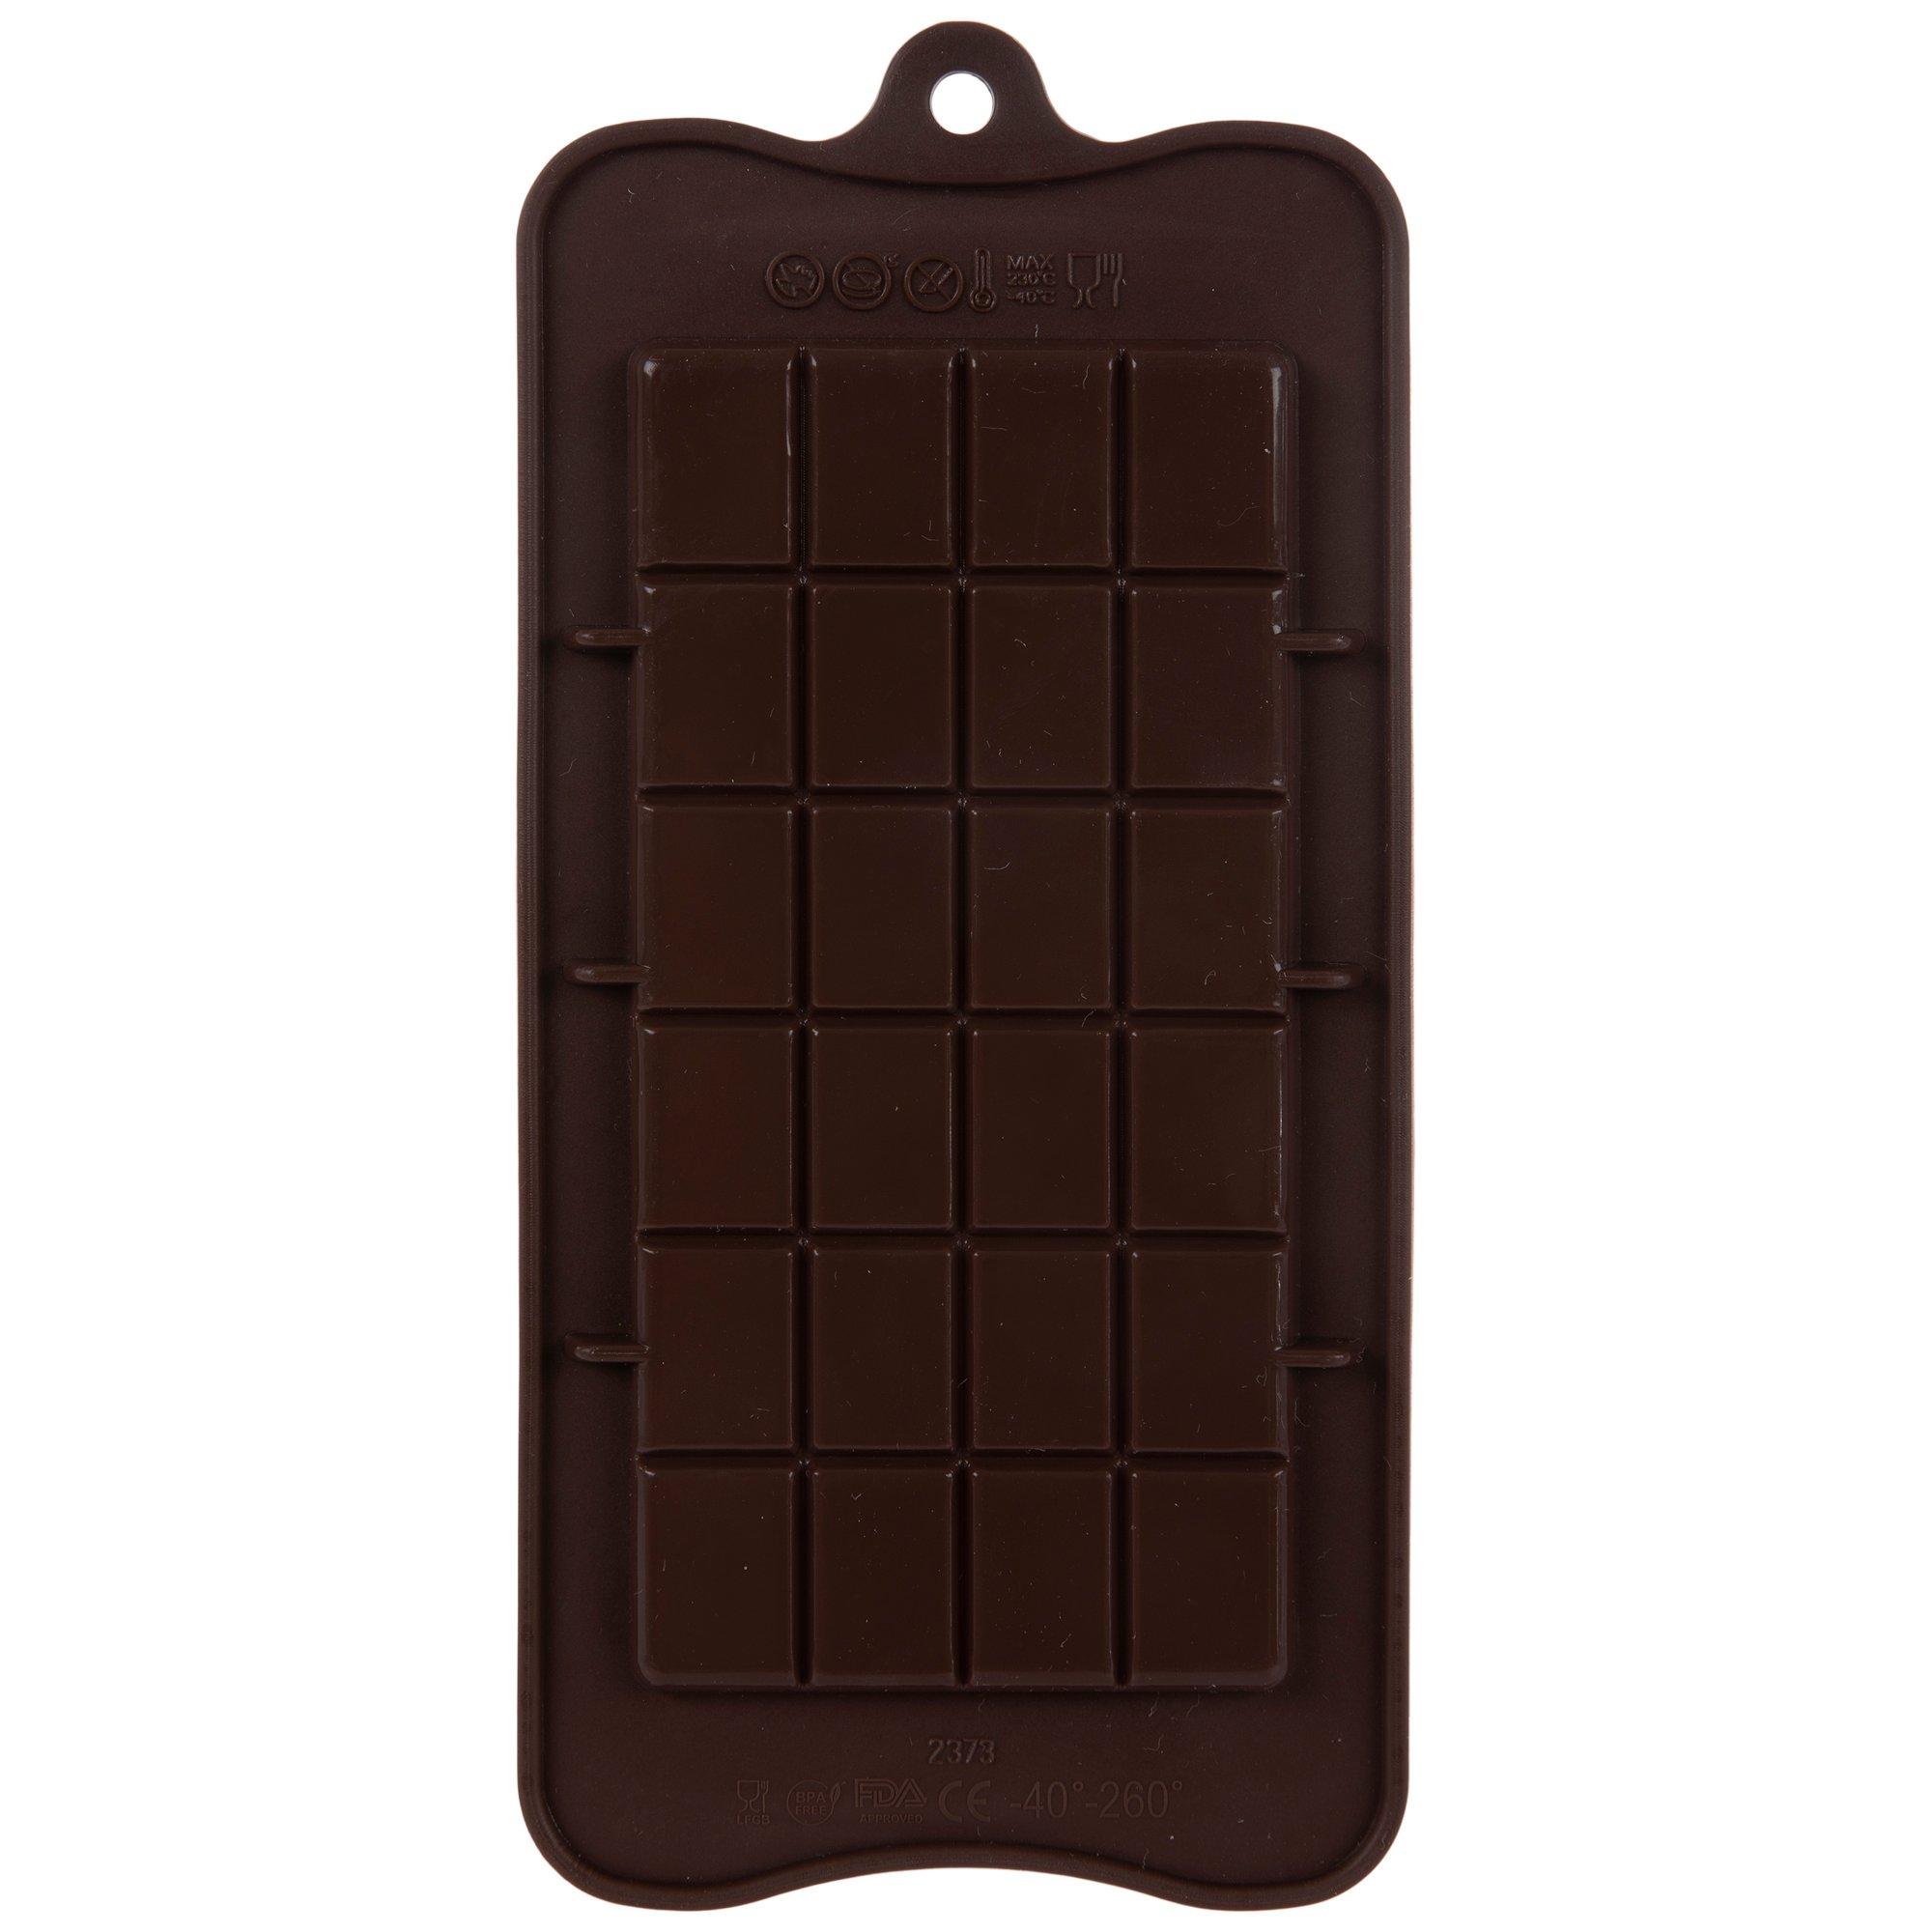 Freshware 15-Cavity Christmas Silicone Mold for Chocolate and Candy White/Brown